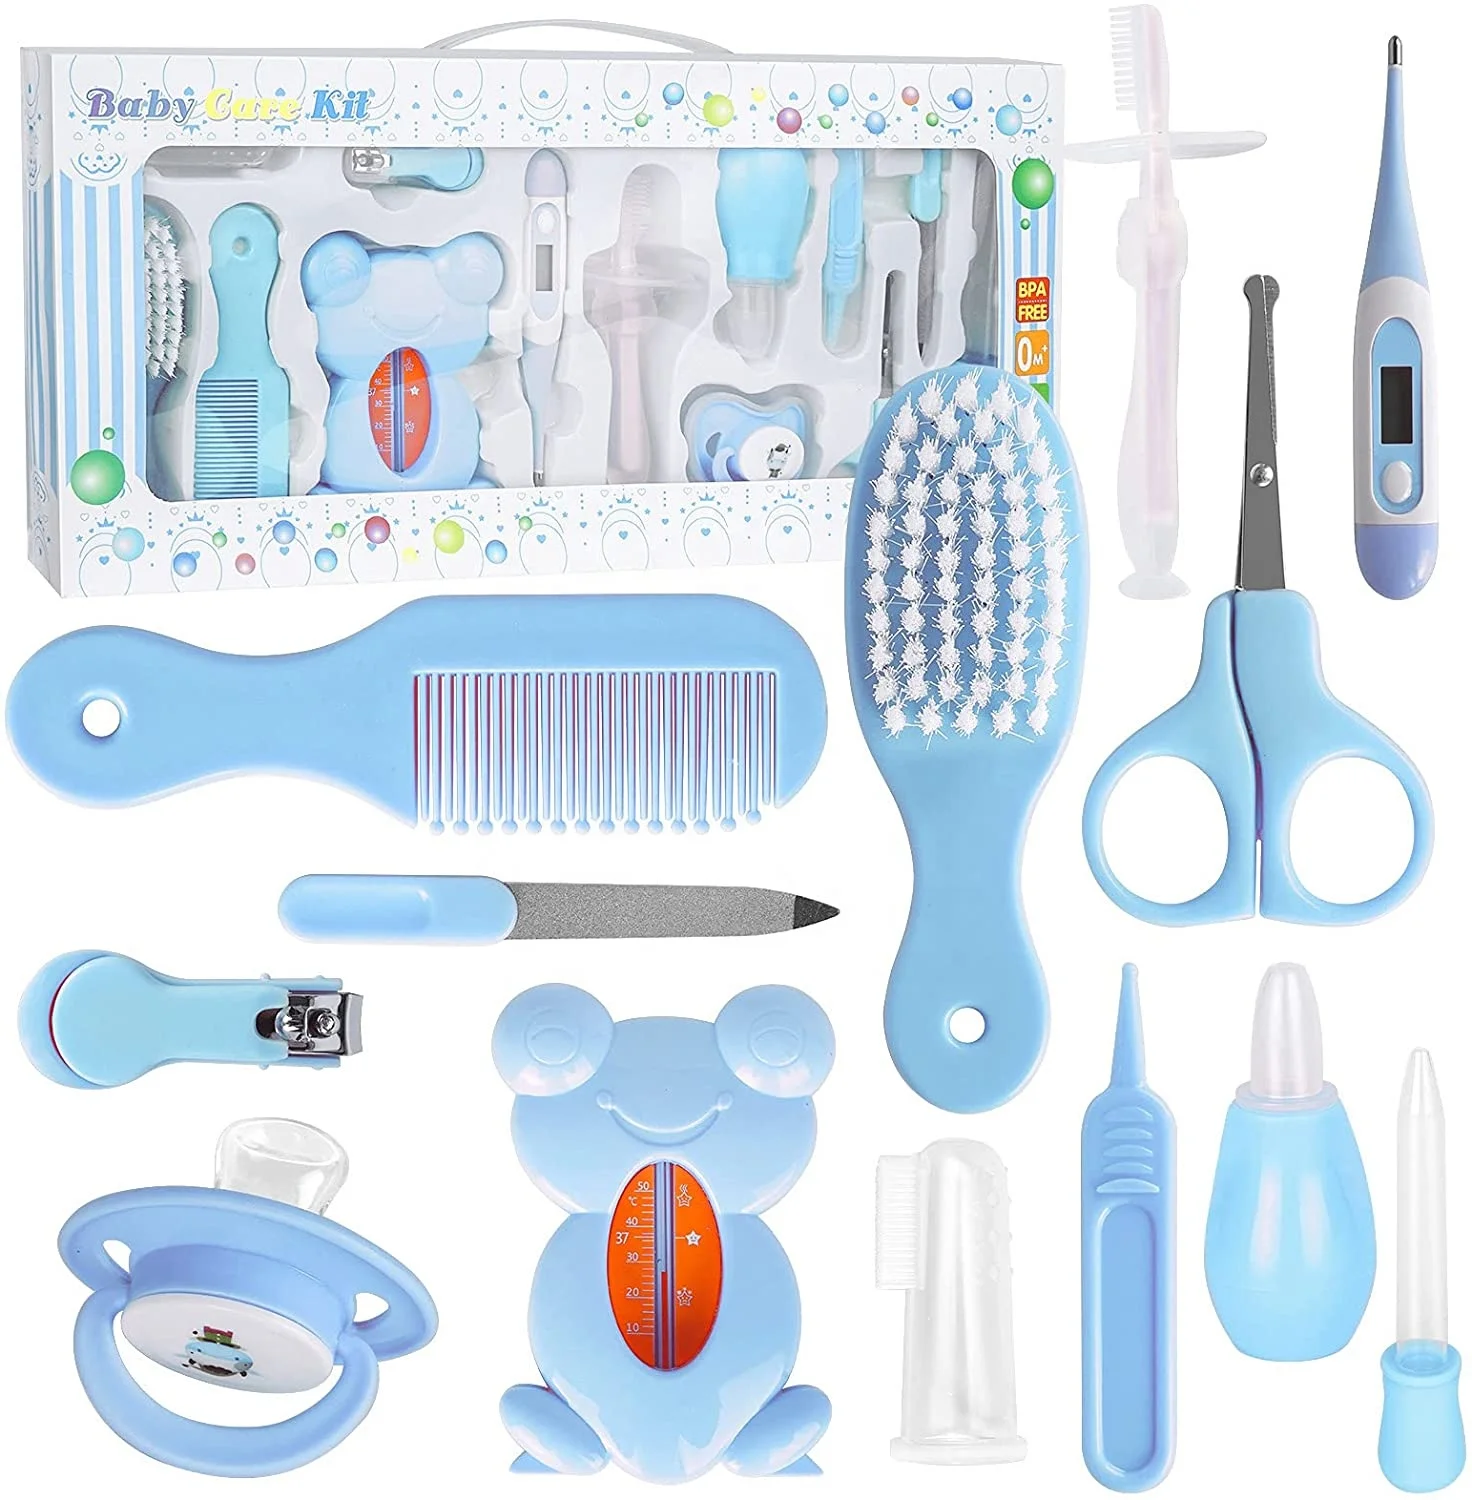 13 In 1 Baby Toddler Newborn Care Grooming Healthcare Kit with Liquid Dropper, Hair Comb, Nail Scissors, First Toothbrush